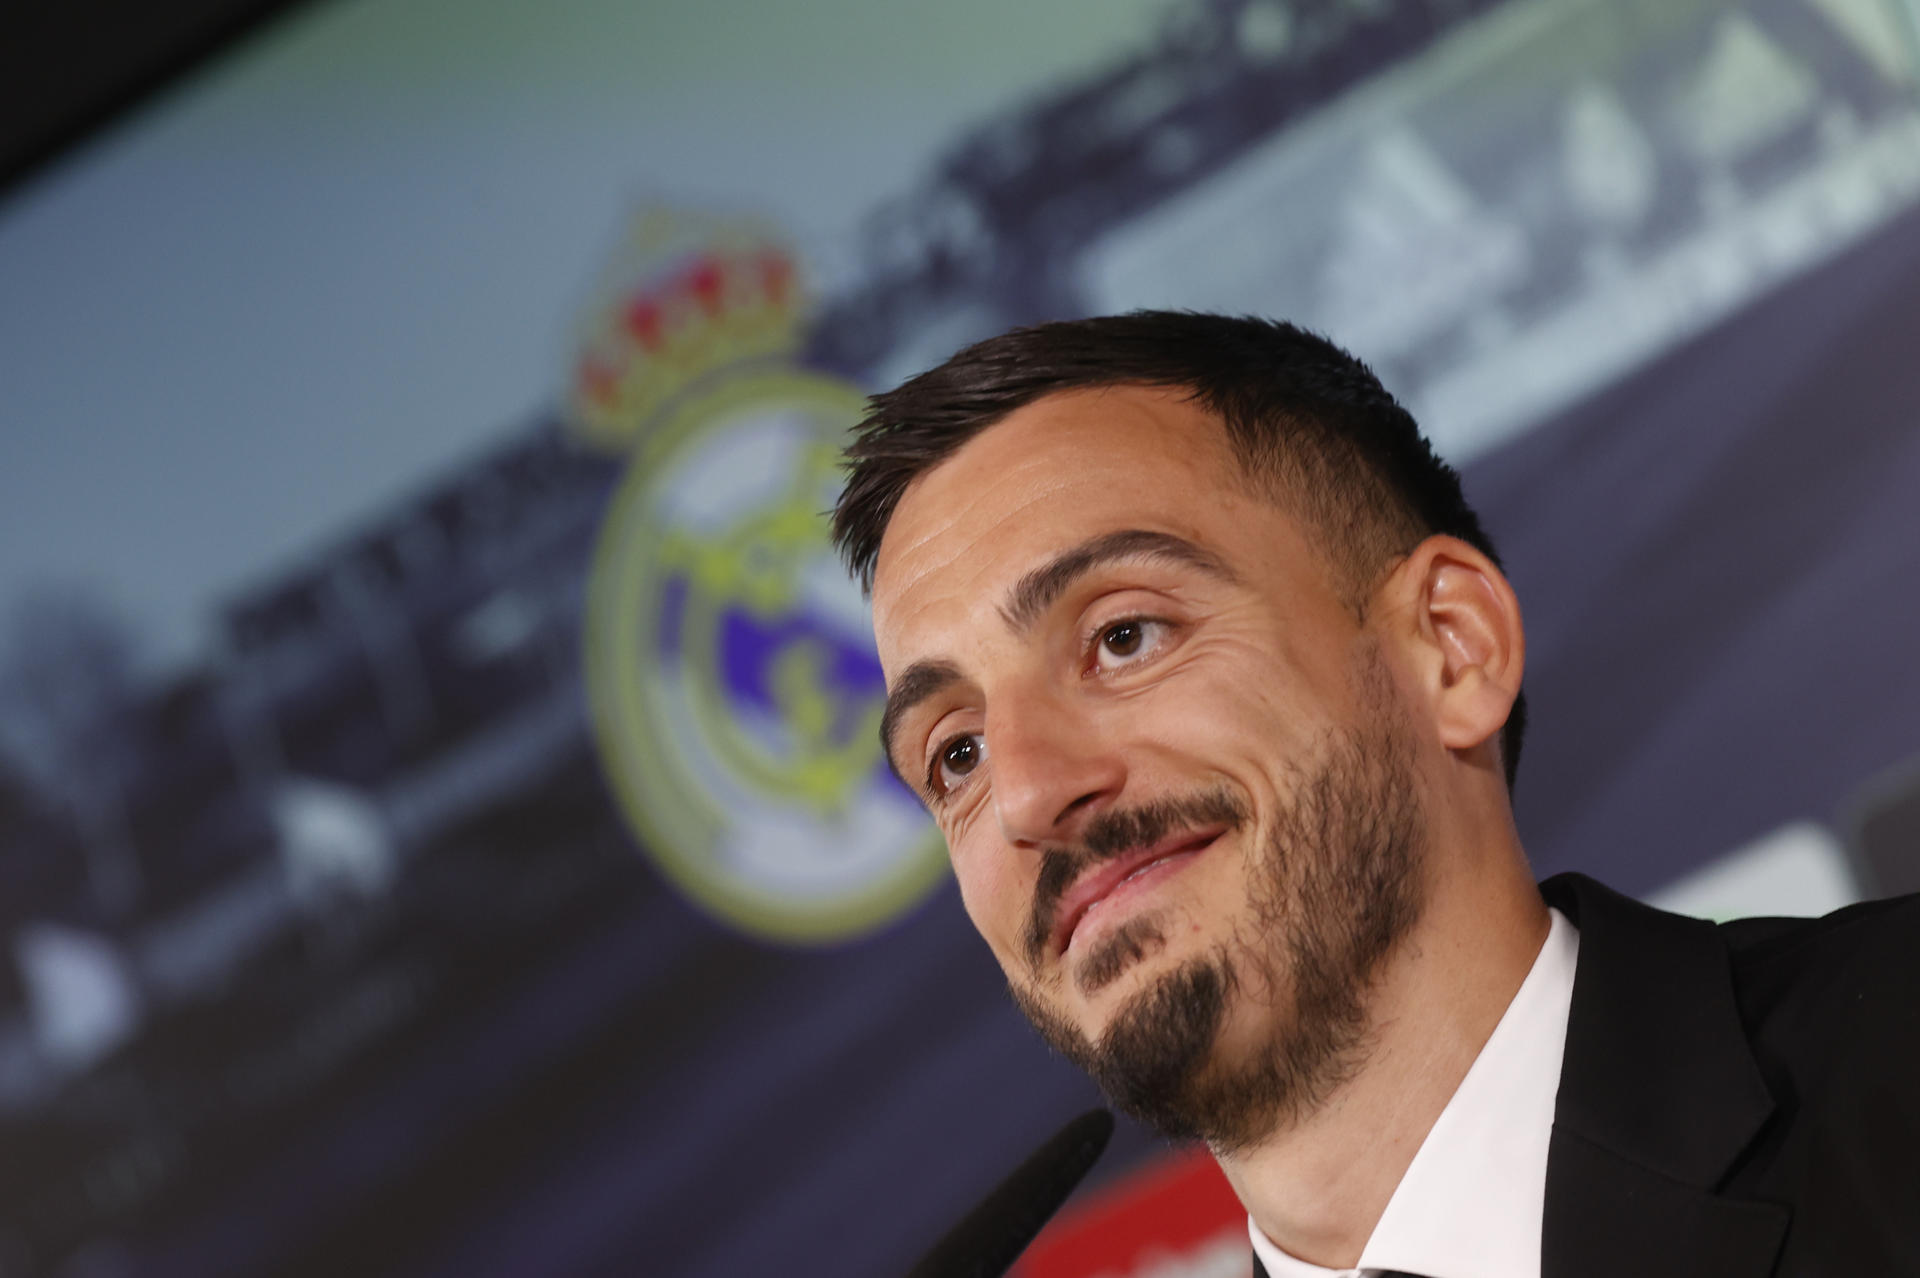 Real Madrid's new forward Joselu Mato attends his presentation press conference at Valdebebas Sports City in Madrid, Spain, 20 June 2023. Joselu will play for Real Madrid on loan from Espanyol during 23/24 season. EFE/ Javier Lizon